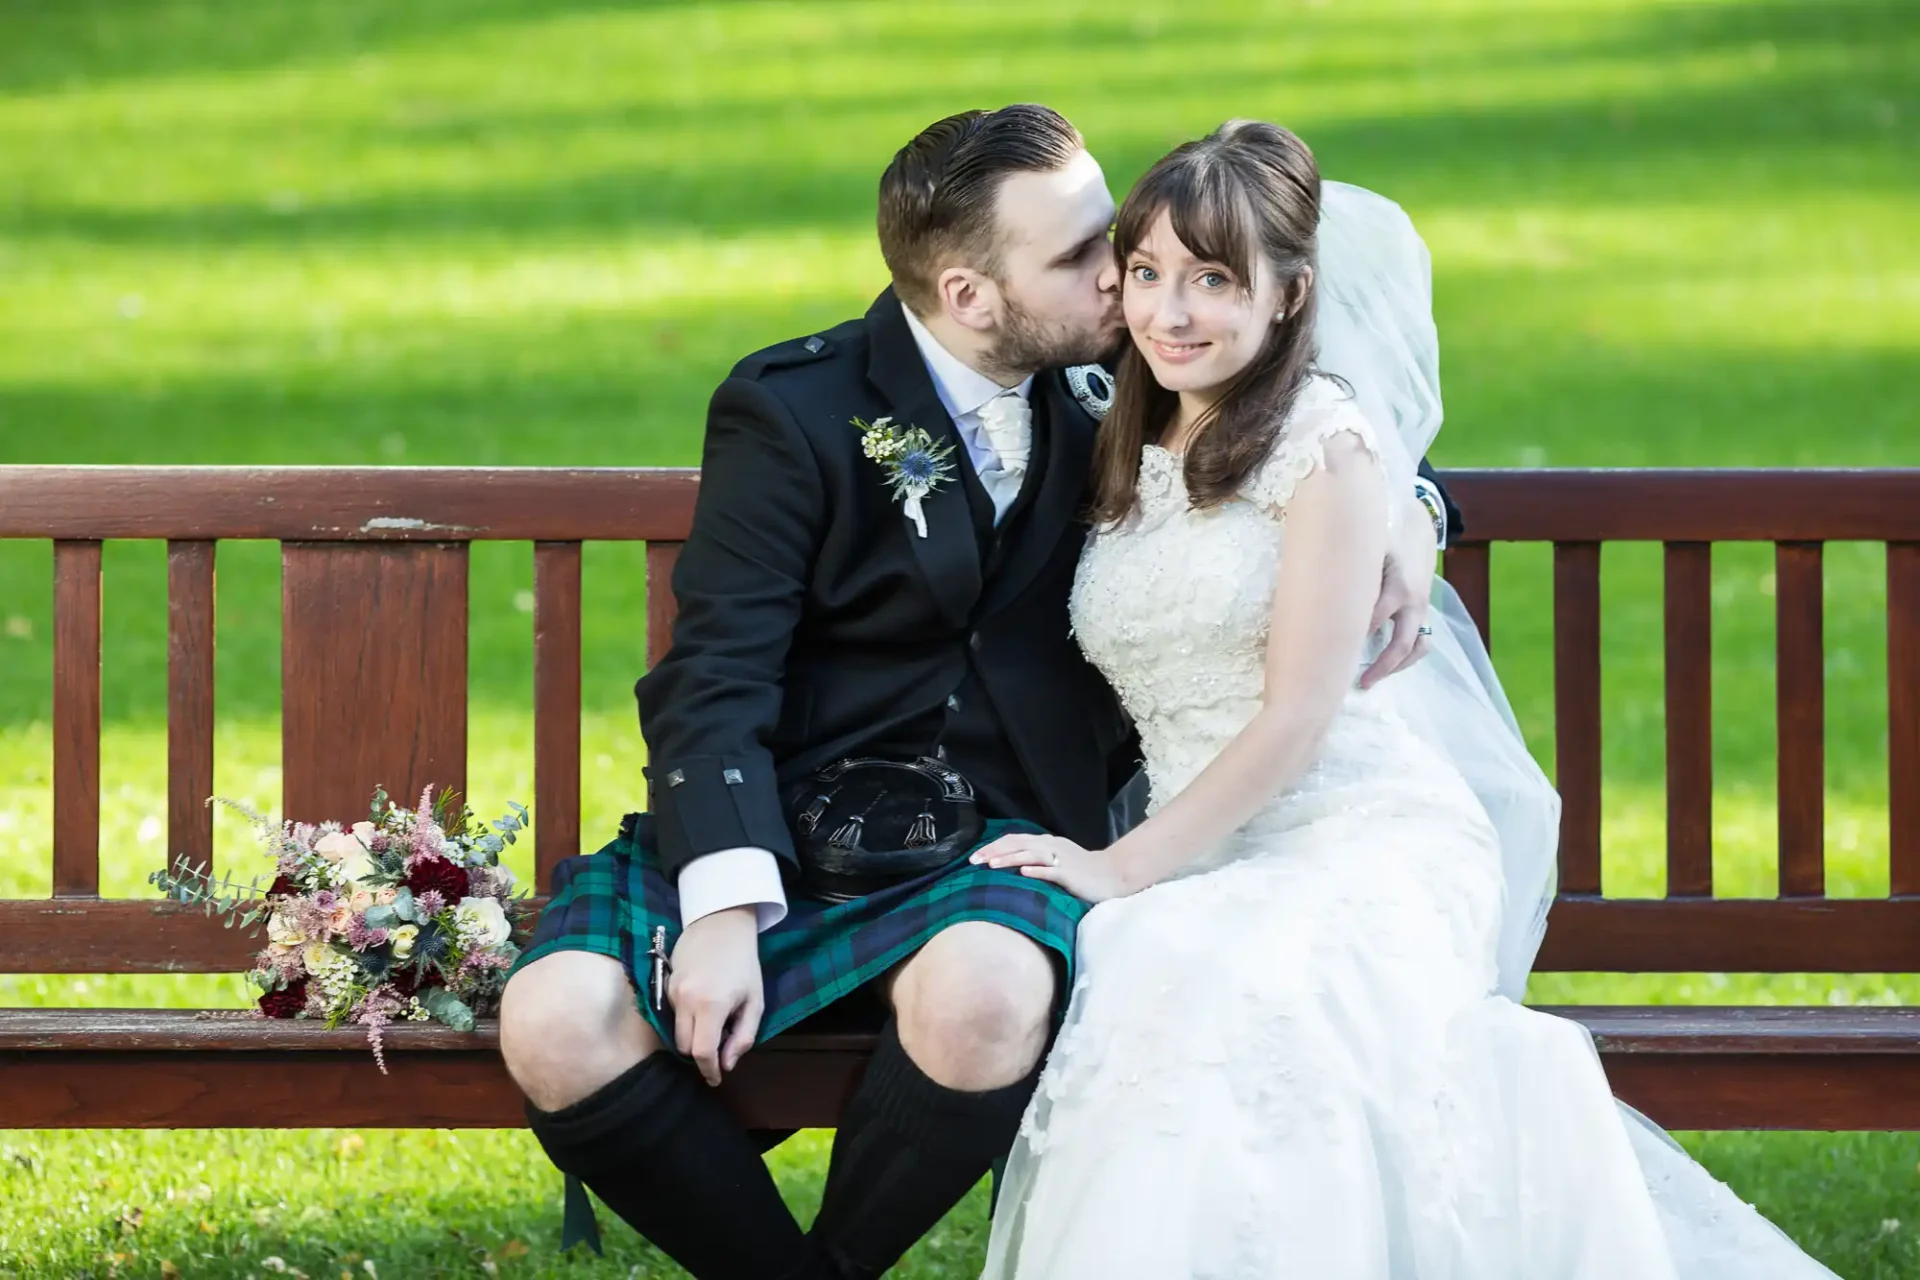 A groom in a kilt kisses a bride on the cheek as they sit on a park bench, both smiling, dressed in wedding attire.